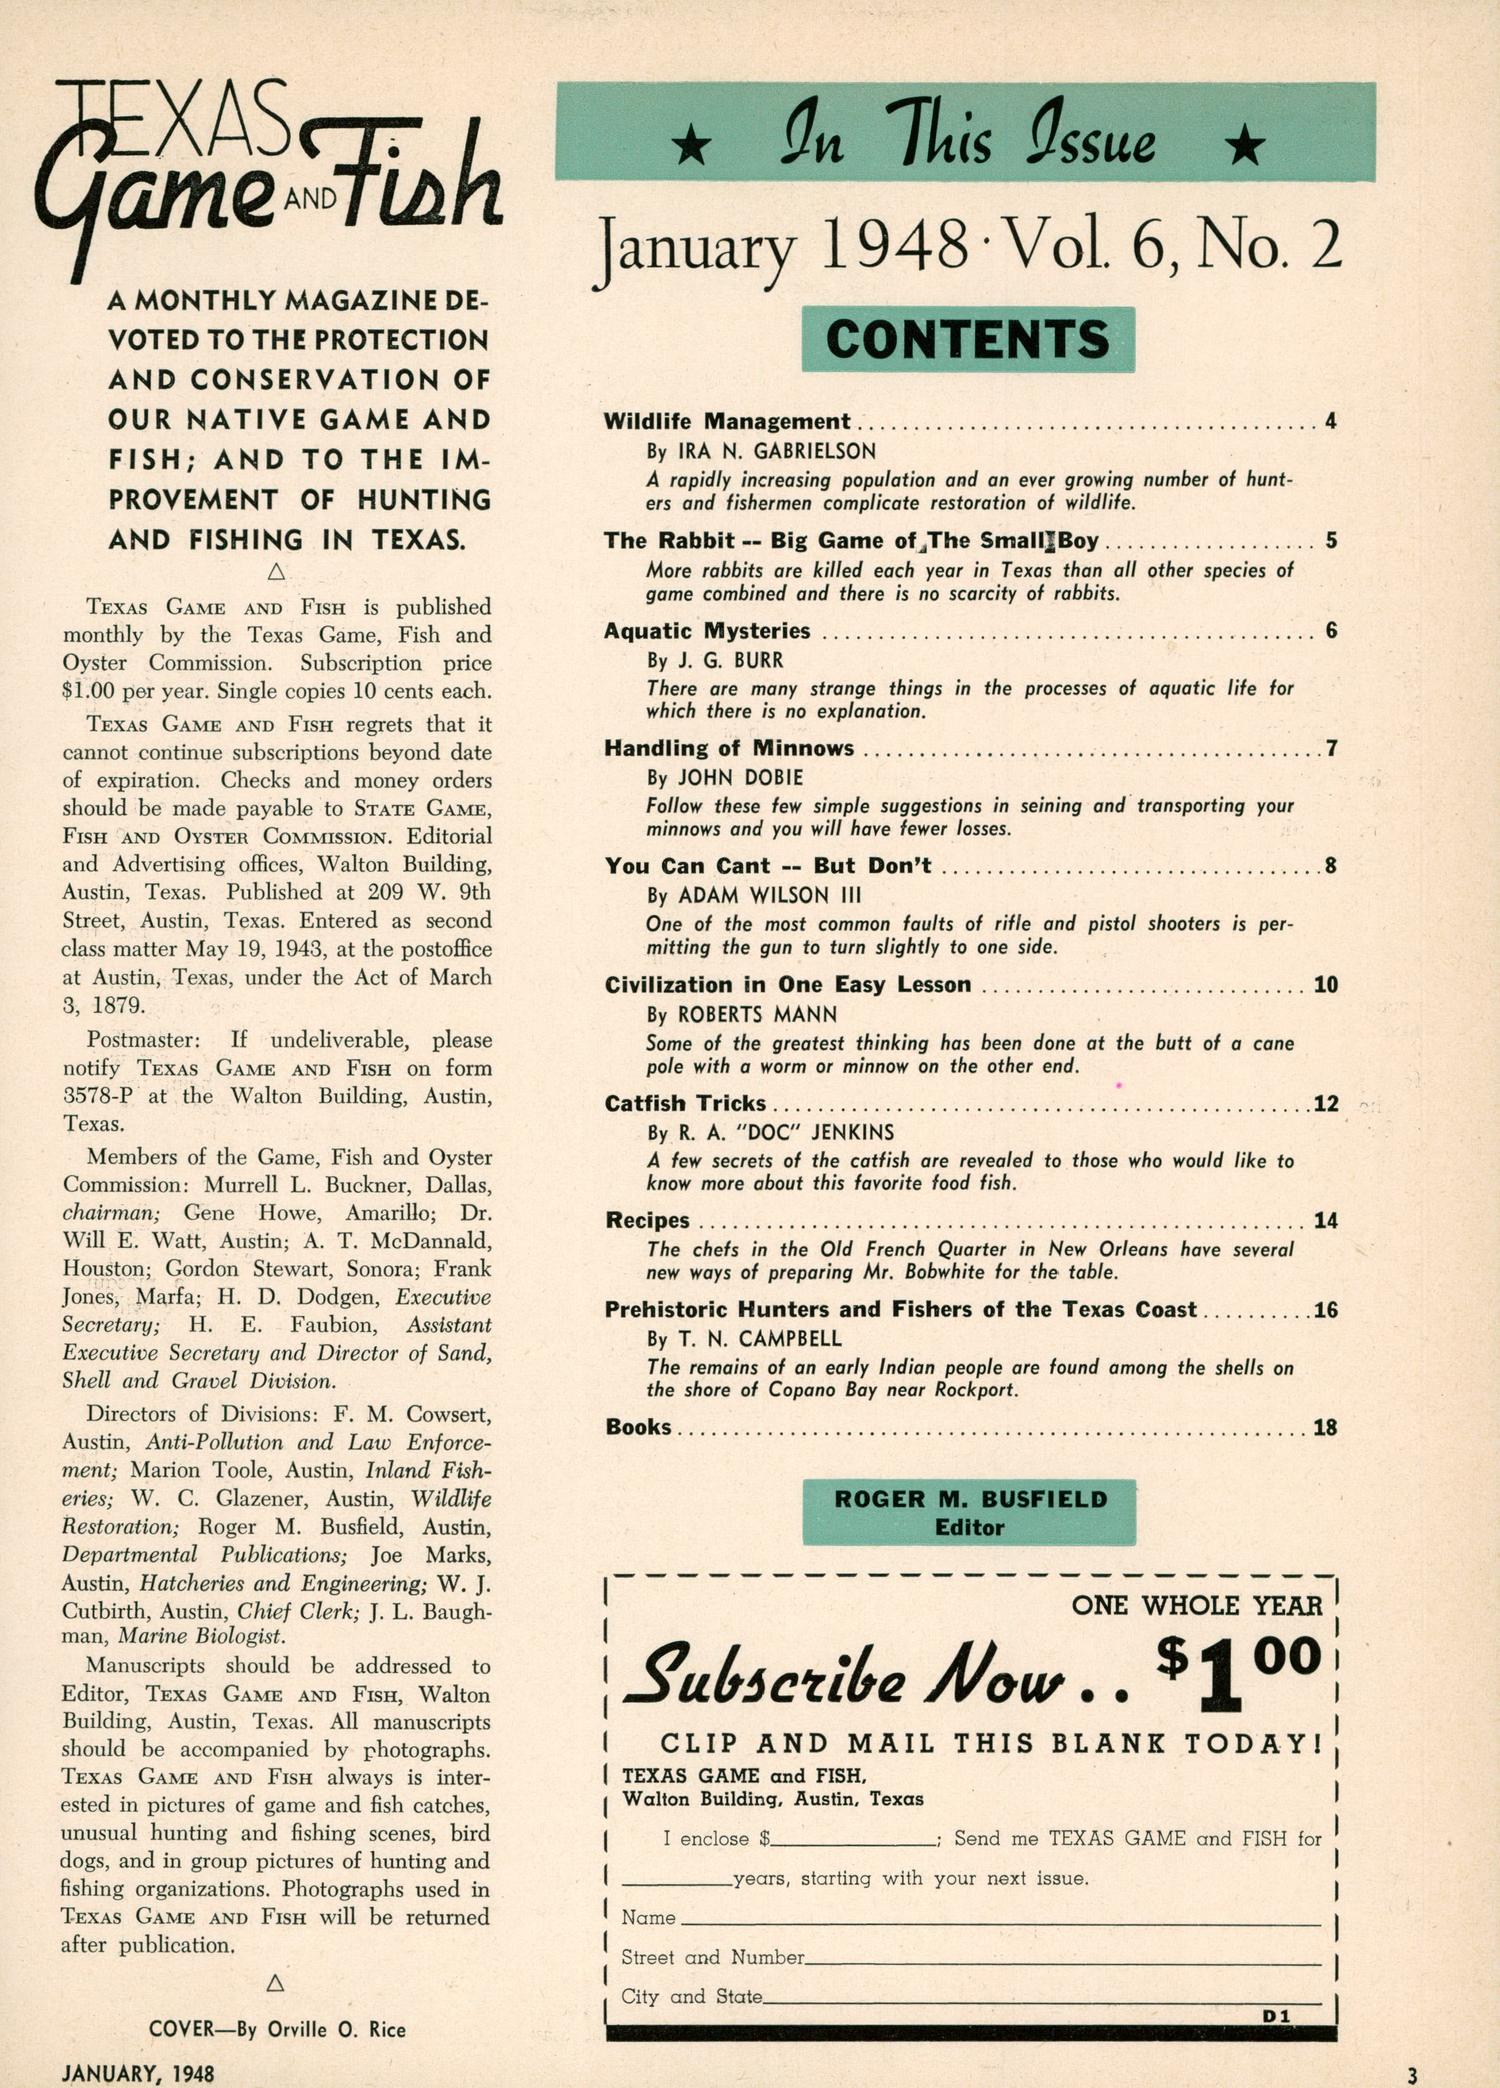 Texas Game and Fish, Volume 6, Number 2, January 1948
                                                
                                                    CONTENTS
                                                